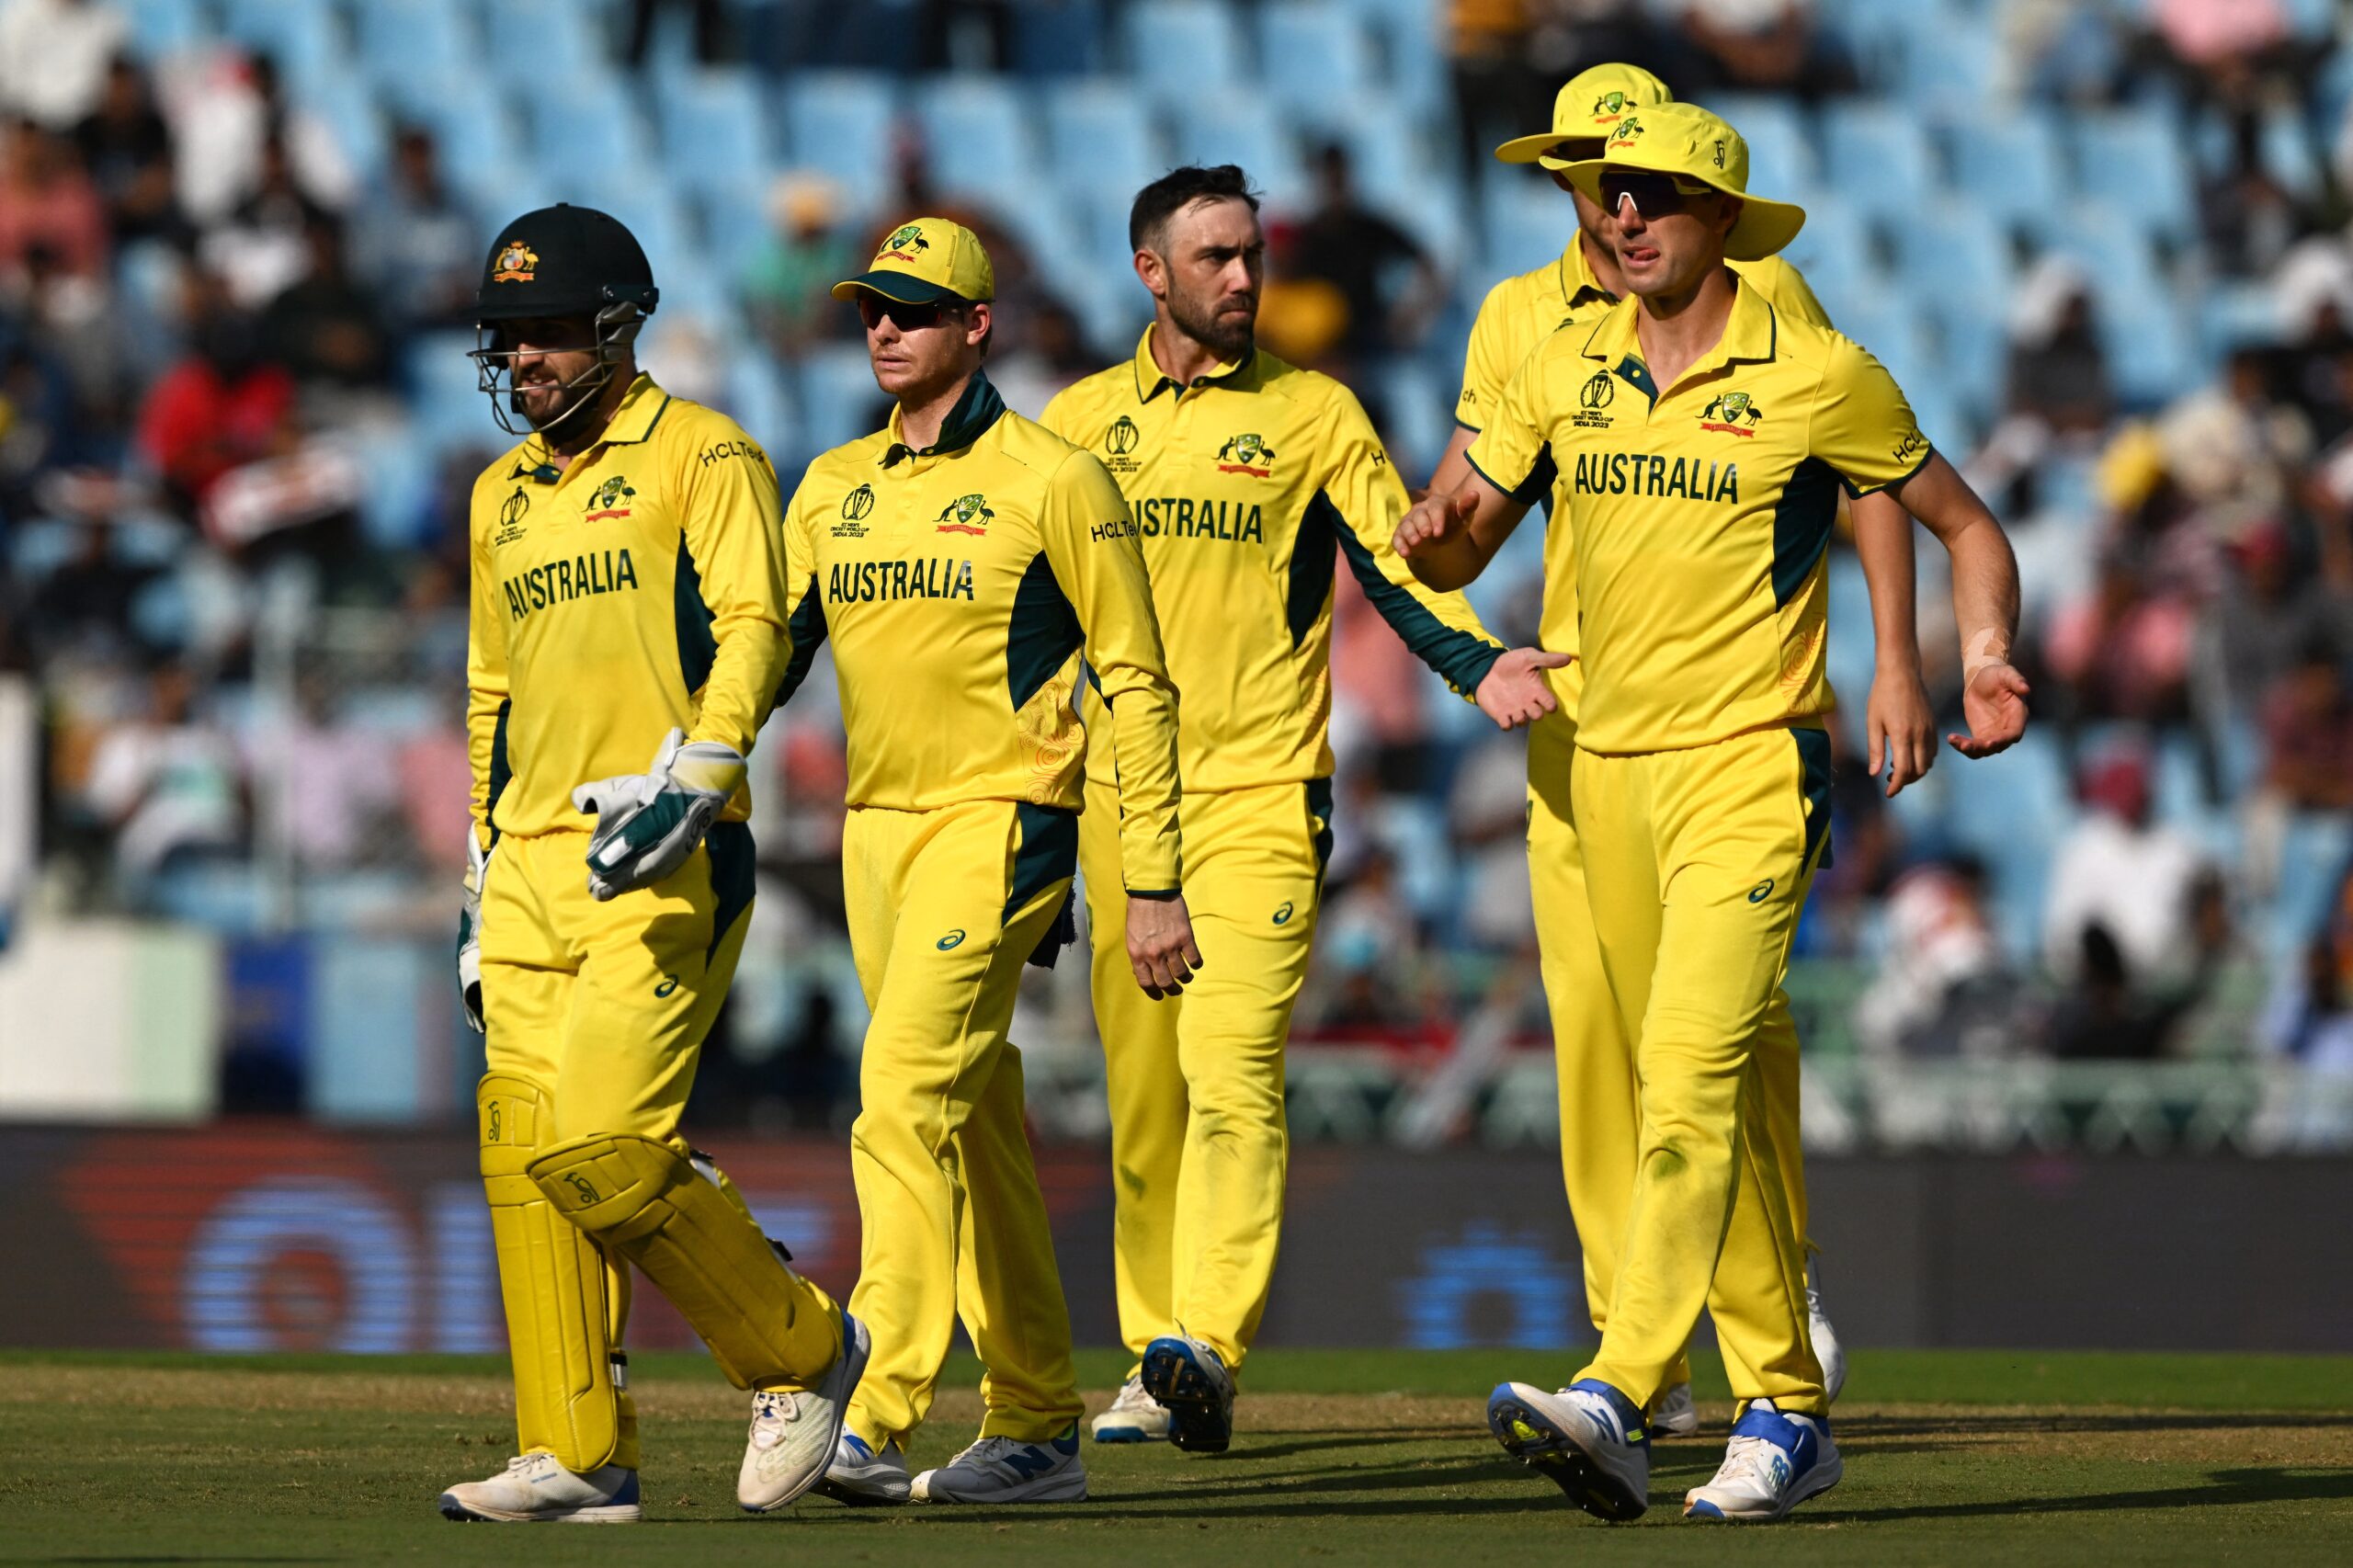 Cricket World Cup 2023: Australia’s Embarrassing Fielding Display With 5 Missed Catches Against South Africa. Watch